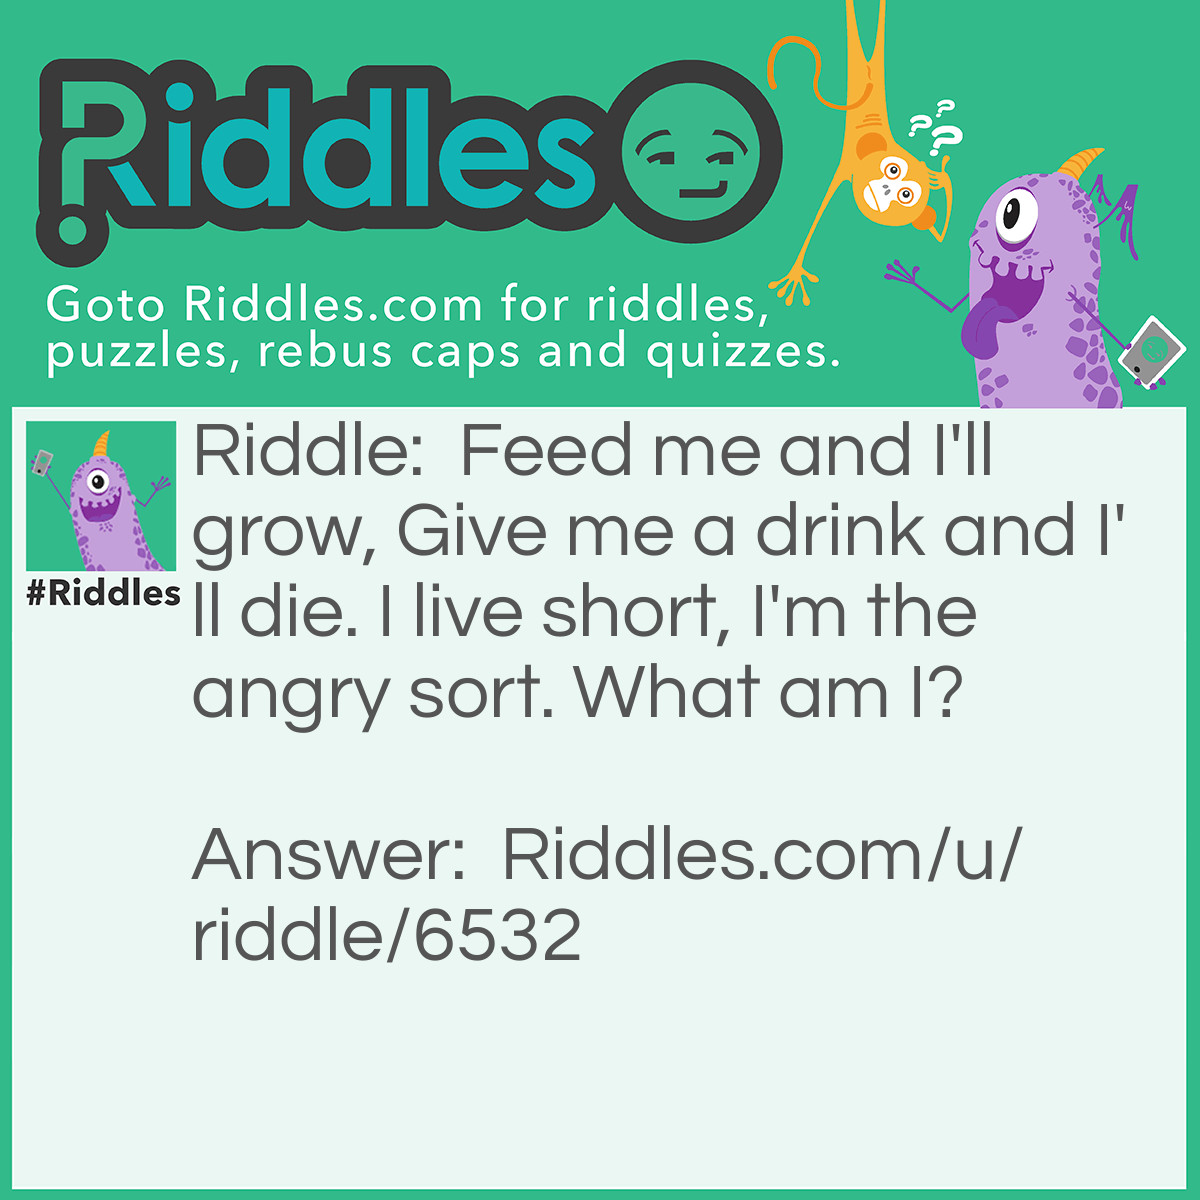 Riddle: Feed me and I'll grow, Give me a drink and I'll die. I live short, I'm the angry sort. What am I? Answer: Flame.